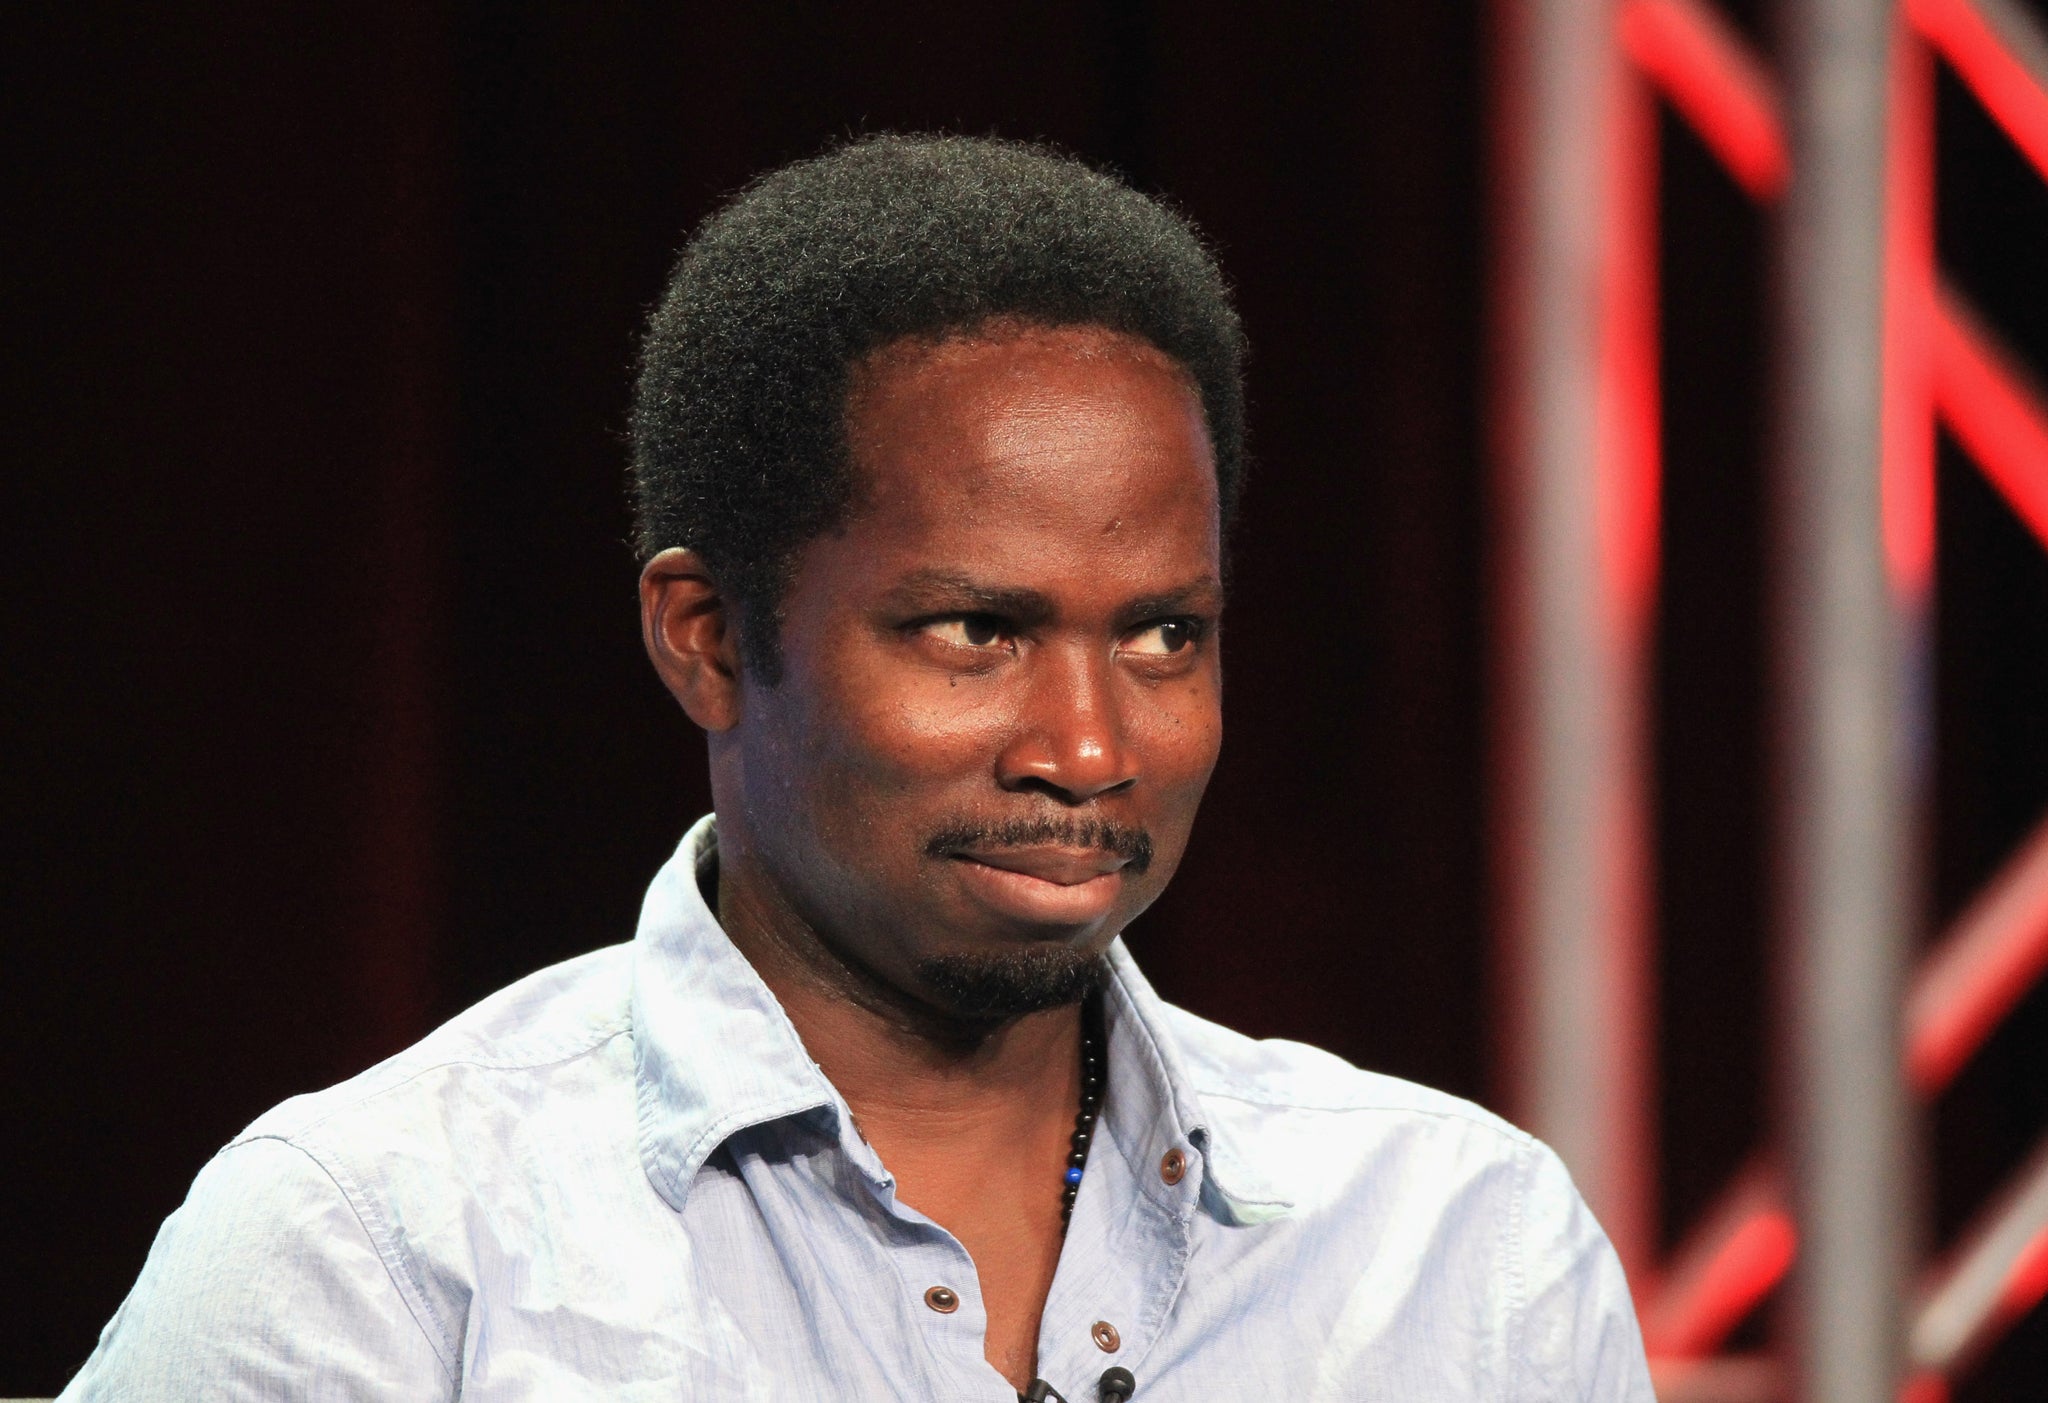 Actor Harold Perrineau, who has previously starred in Romeo+Juliet, Lost and Oz